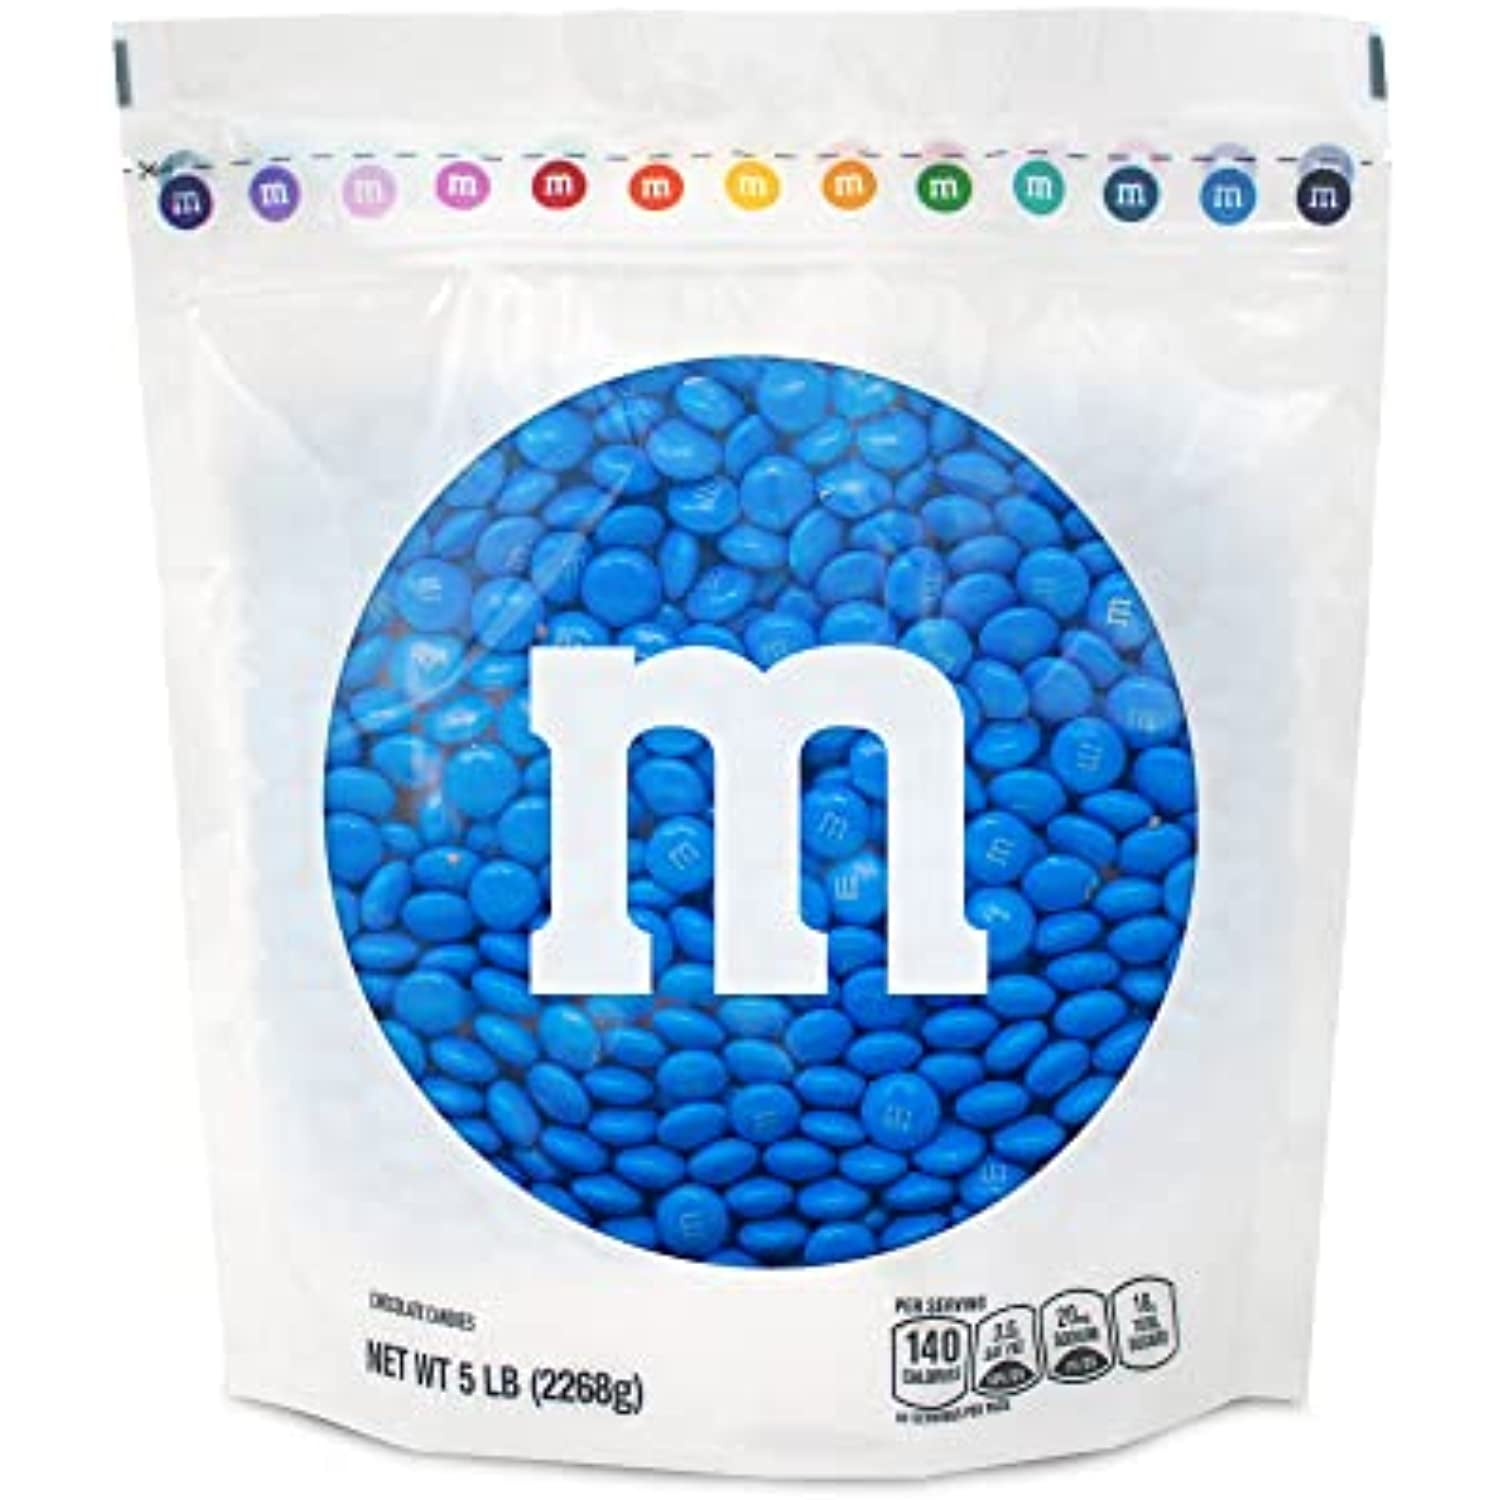  M&M'S Peanut Blue Chocolate Candy, 2lbs of Bulk Candy in  Resealable Pack for Graduations, Weddings, 4th of July, Birthday Parties,  Candy Bars, Dessert Tables & DIY Party Favors : Grocery 